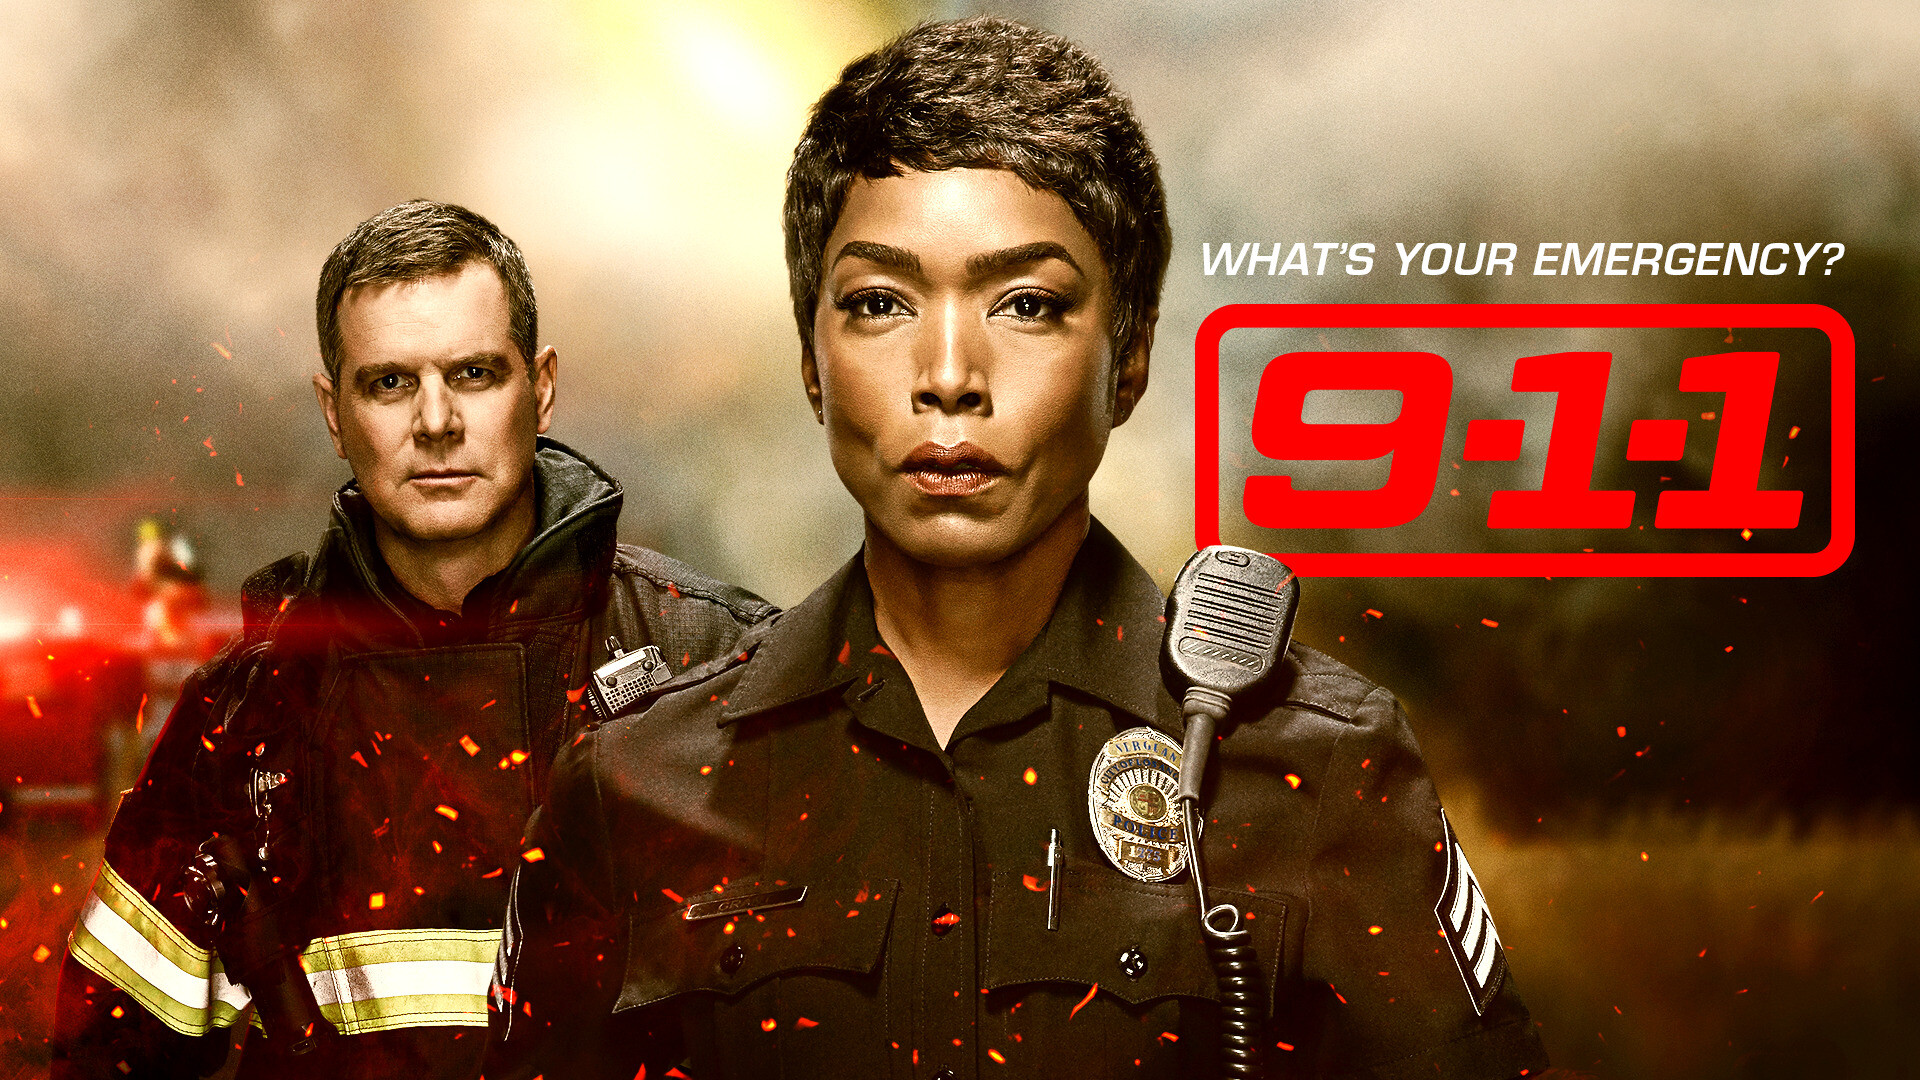 9-1-1 (TV Series): Firefighter Equipment, Police Uniform, Athena And Robert Nash, Police Officer, Emergency Situations. 1920x1080 Full HD Wallpaper.